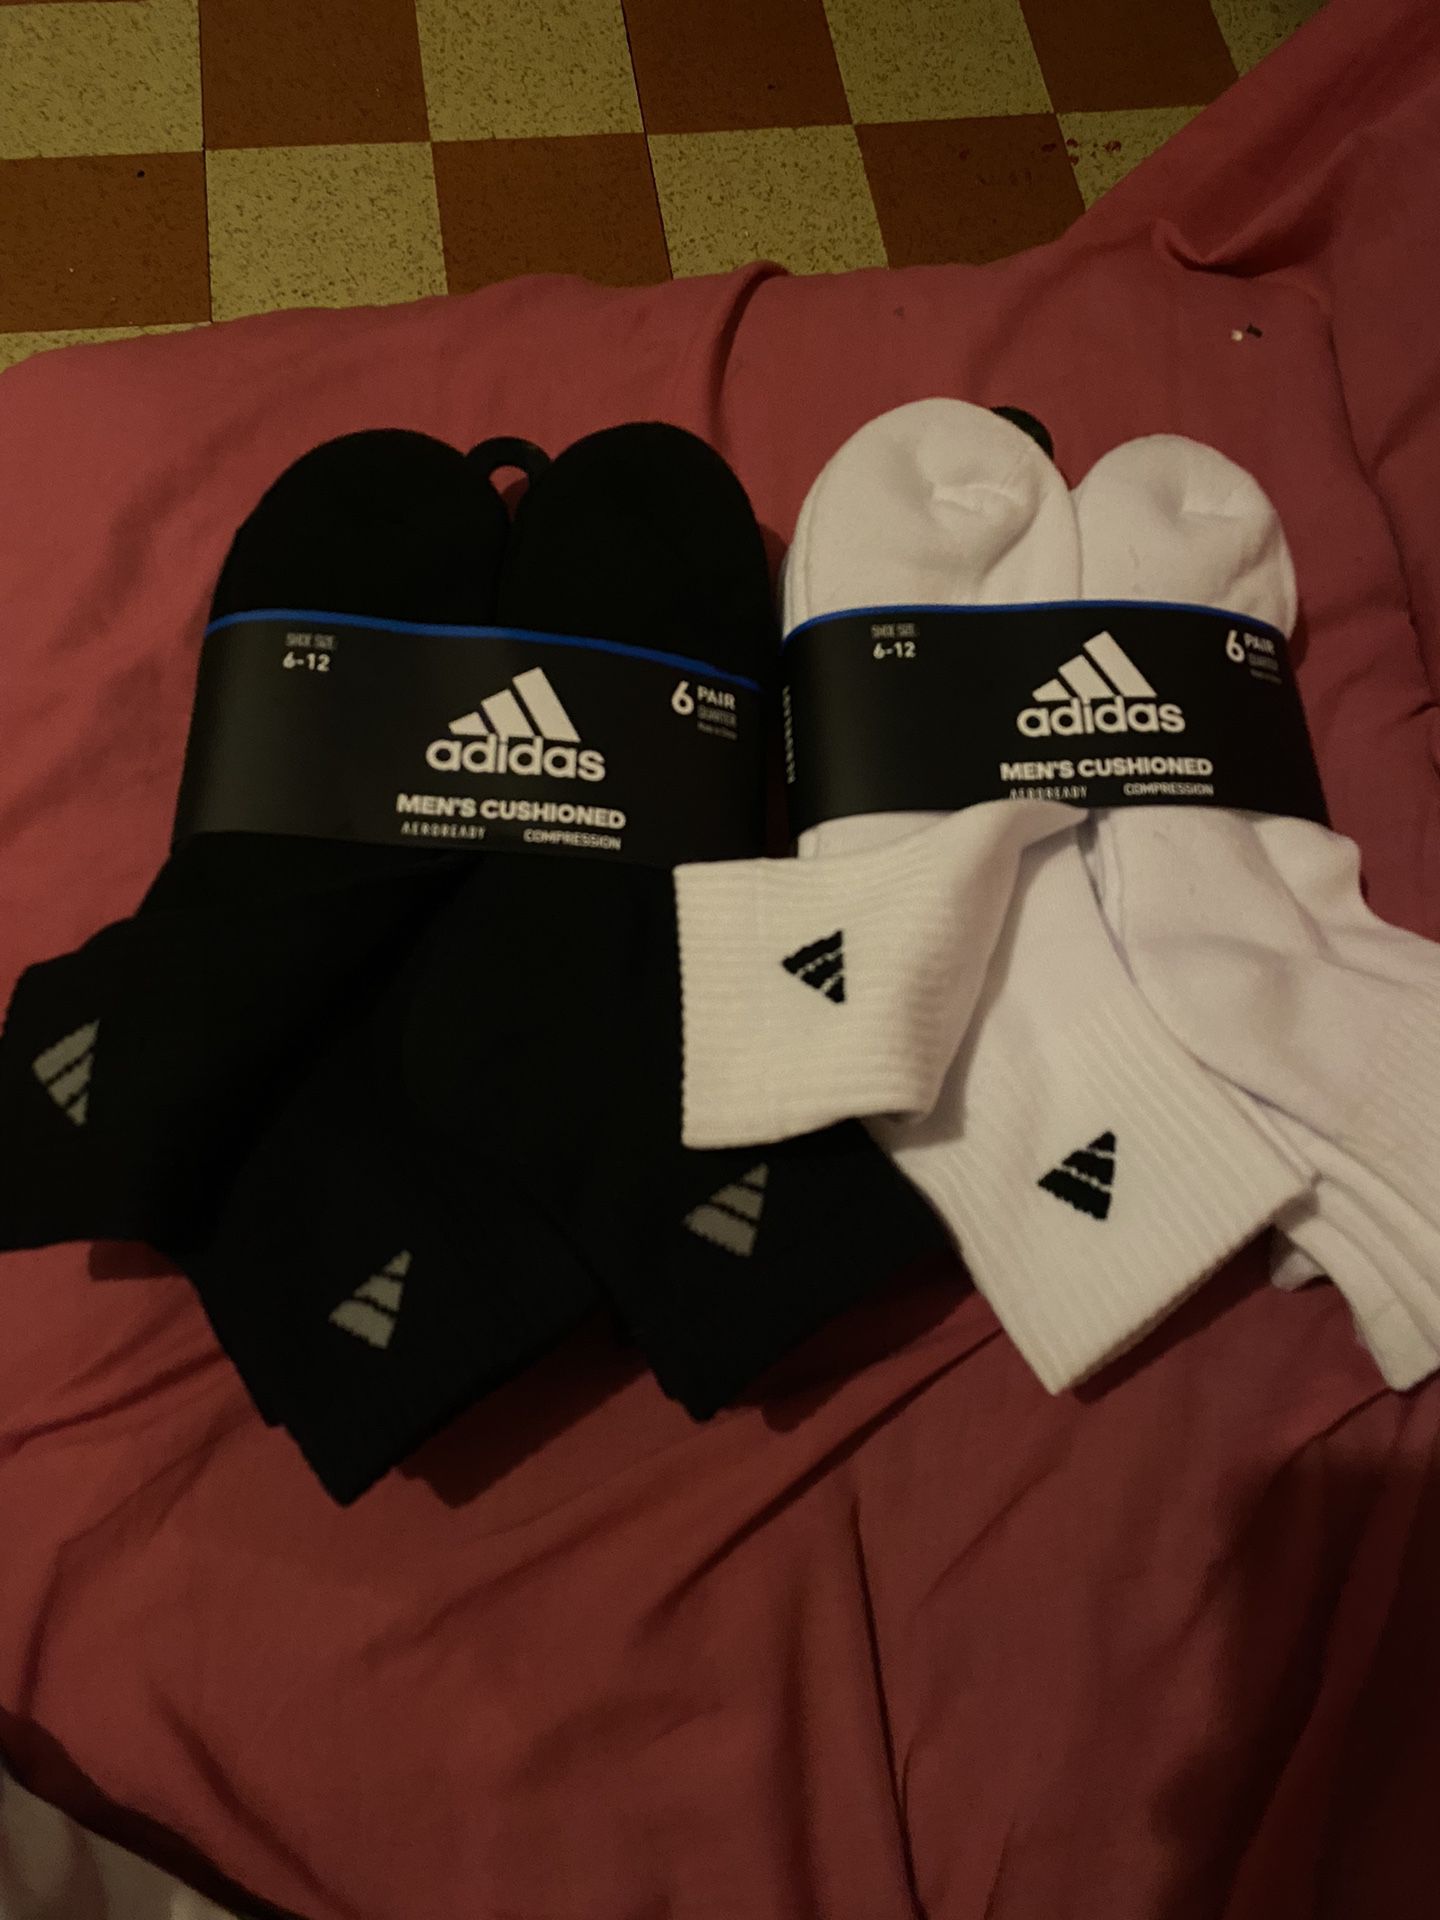 Adidas Compression Socks 12 PAIRS total Size 6-12M